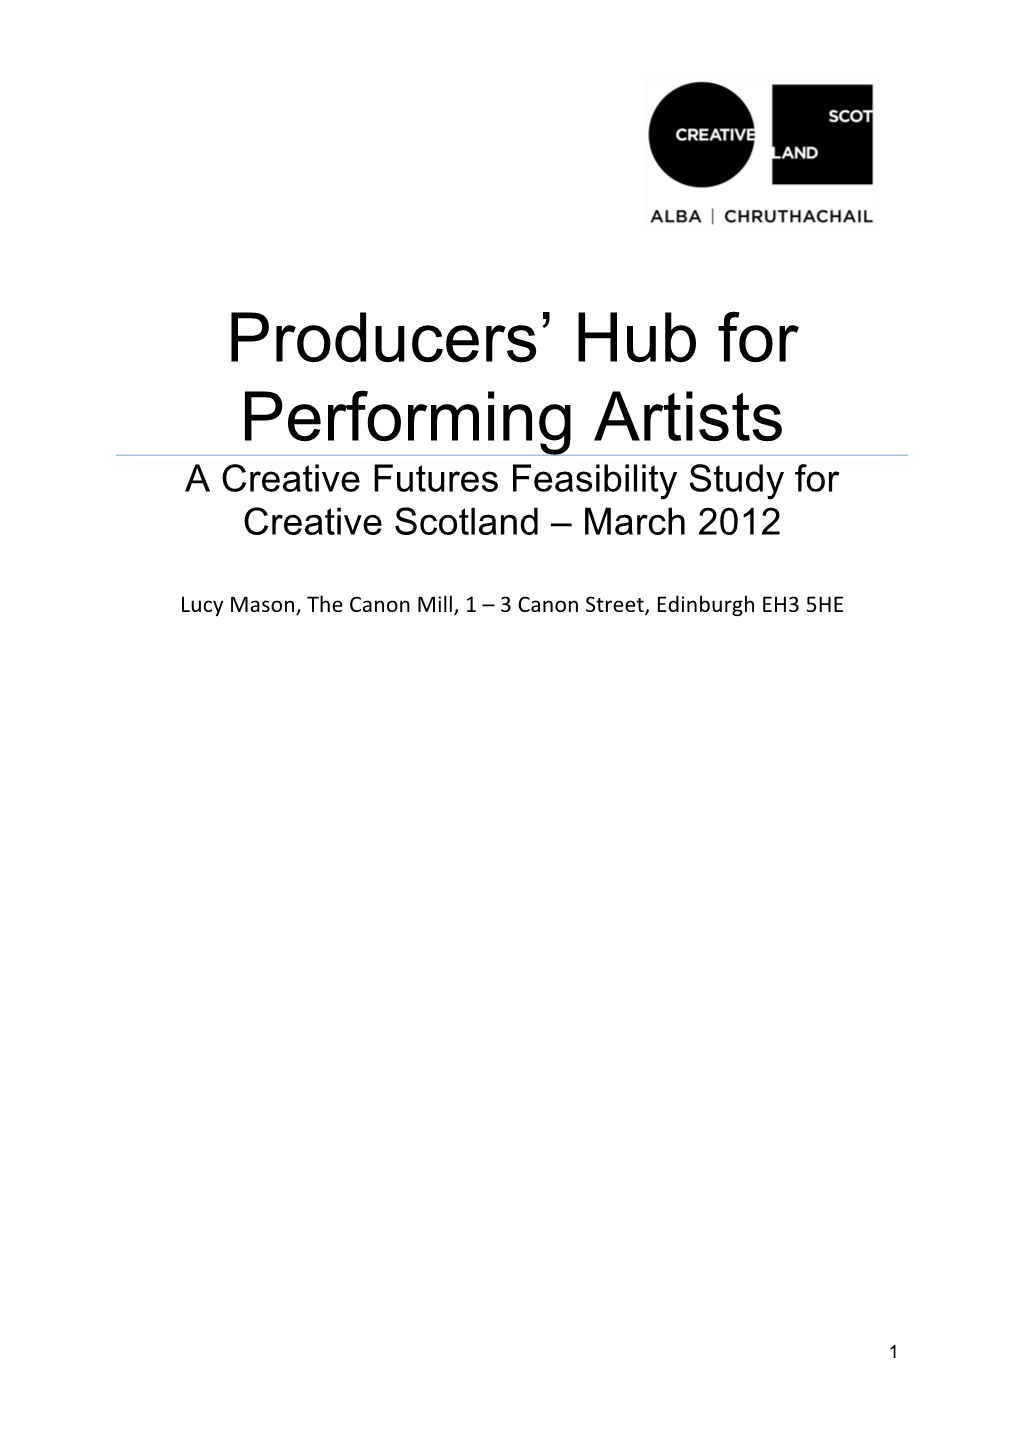 Producers' Hub for Performing Artists